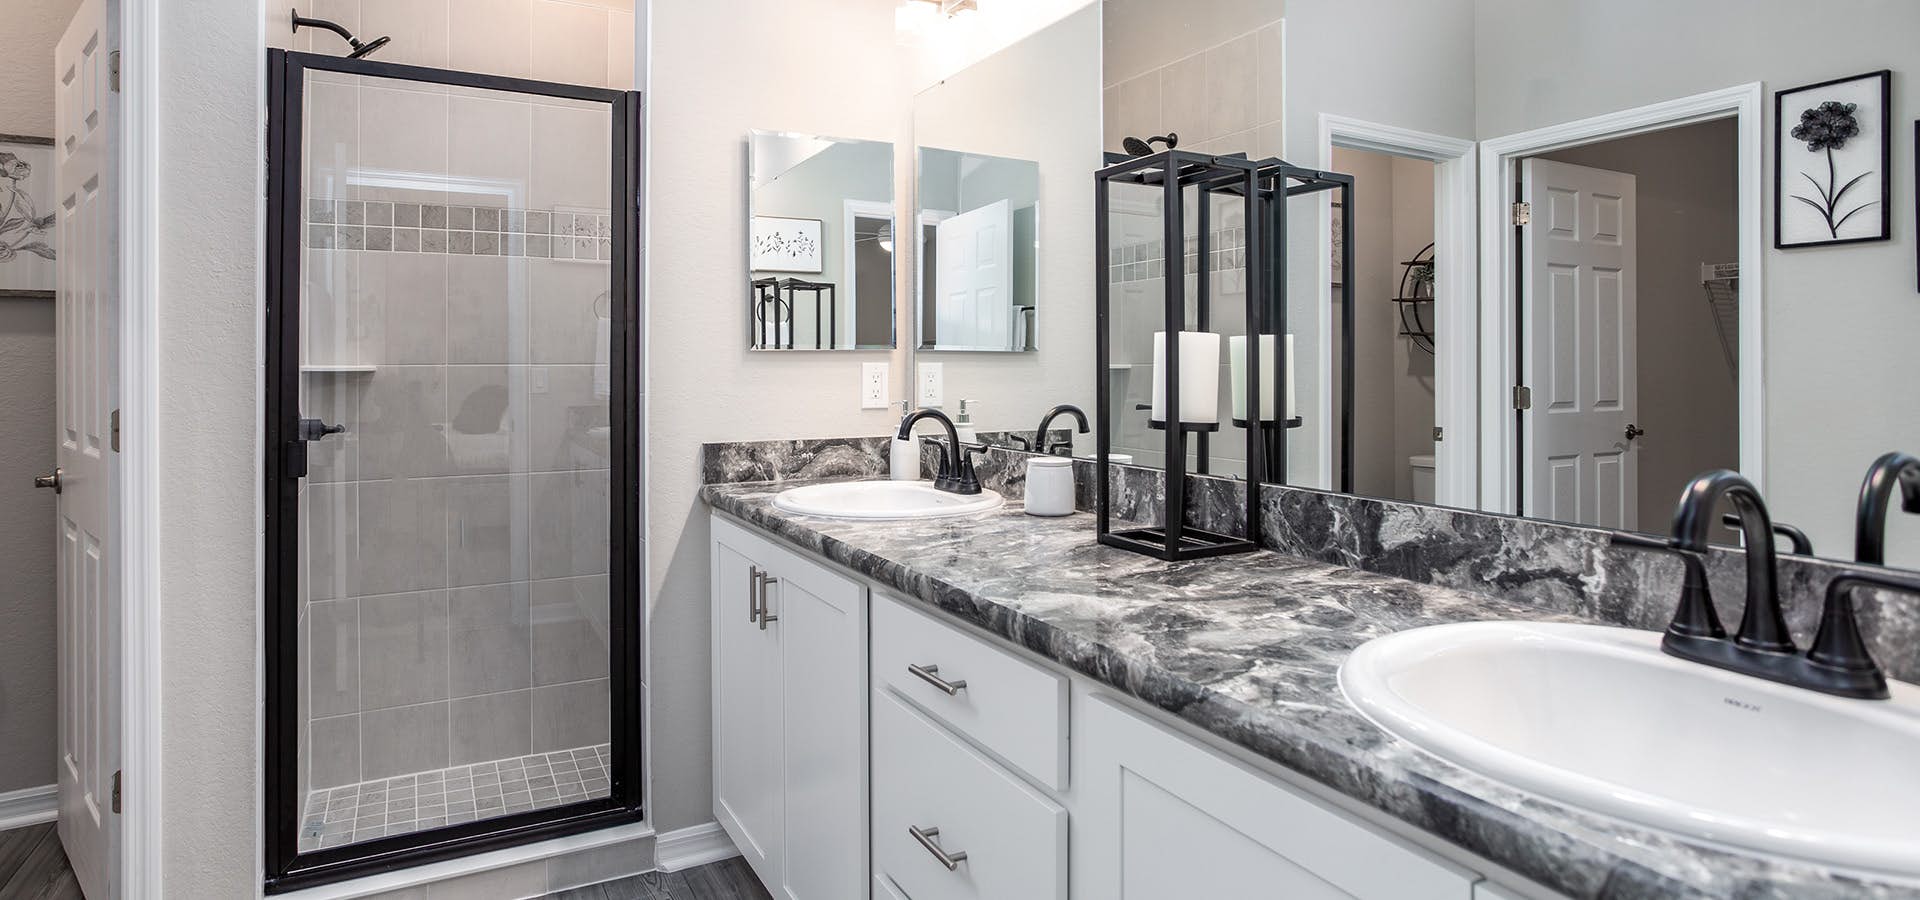 Large en-suite bathroom with white cabinets and dark fixtures